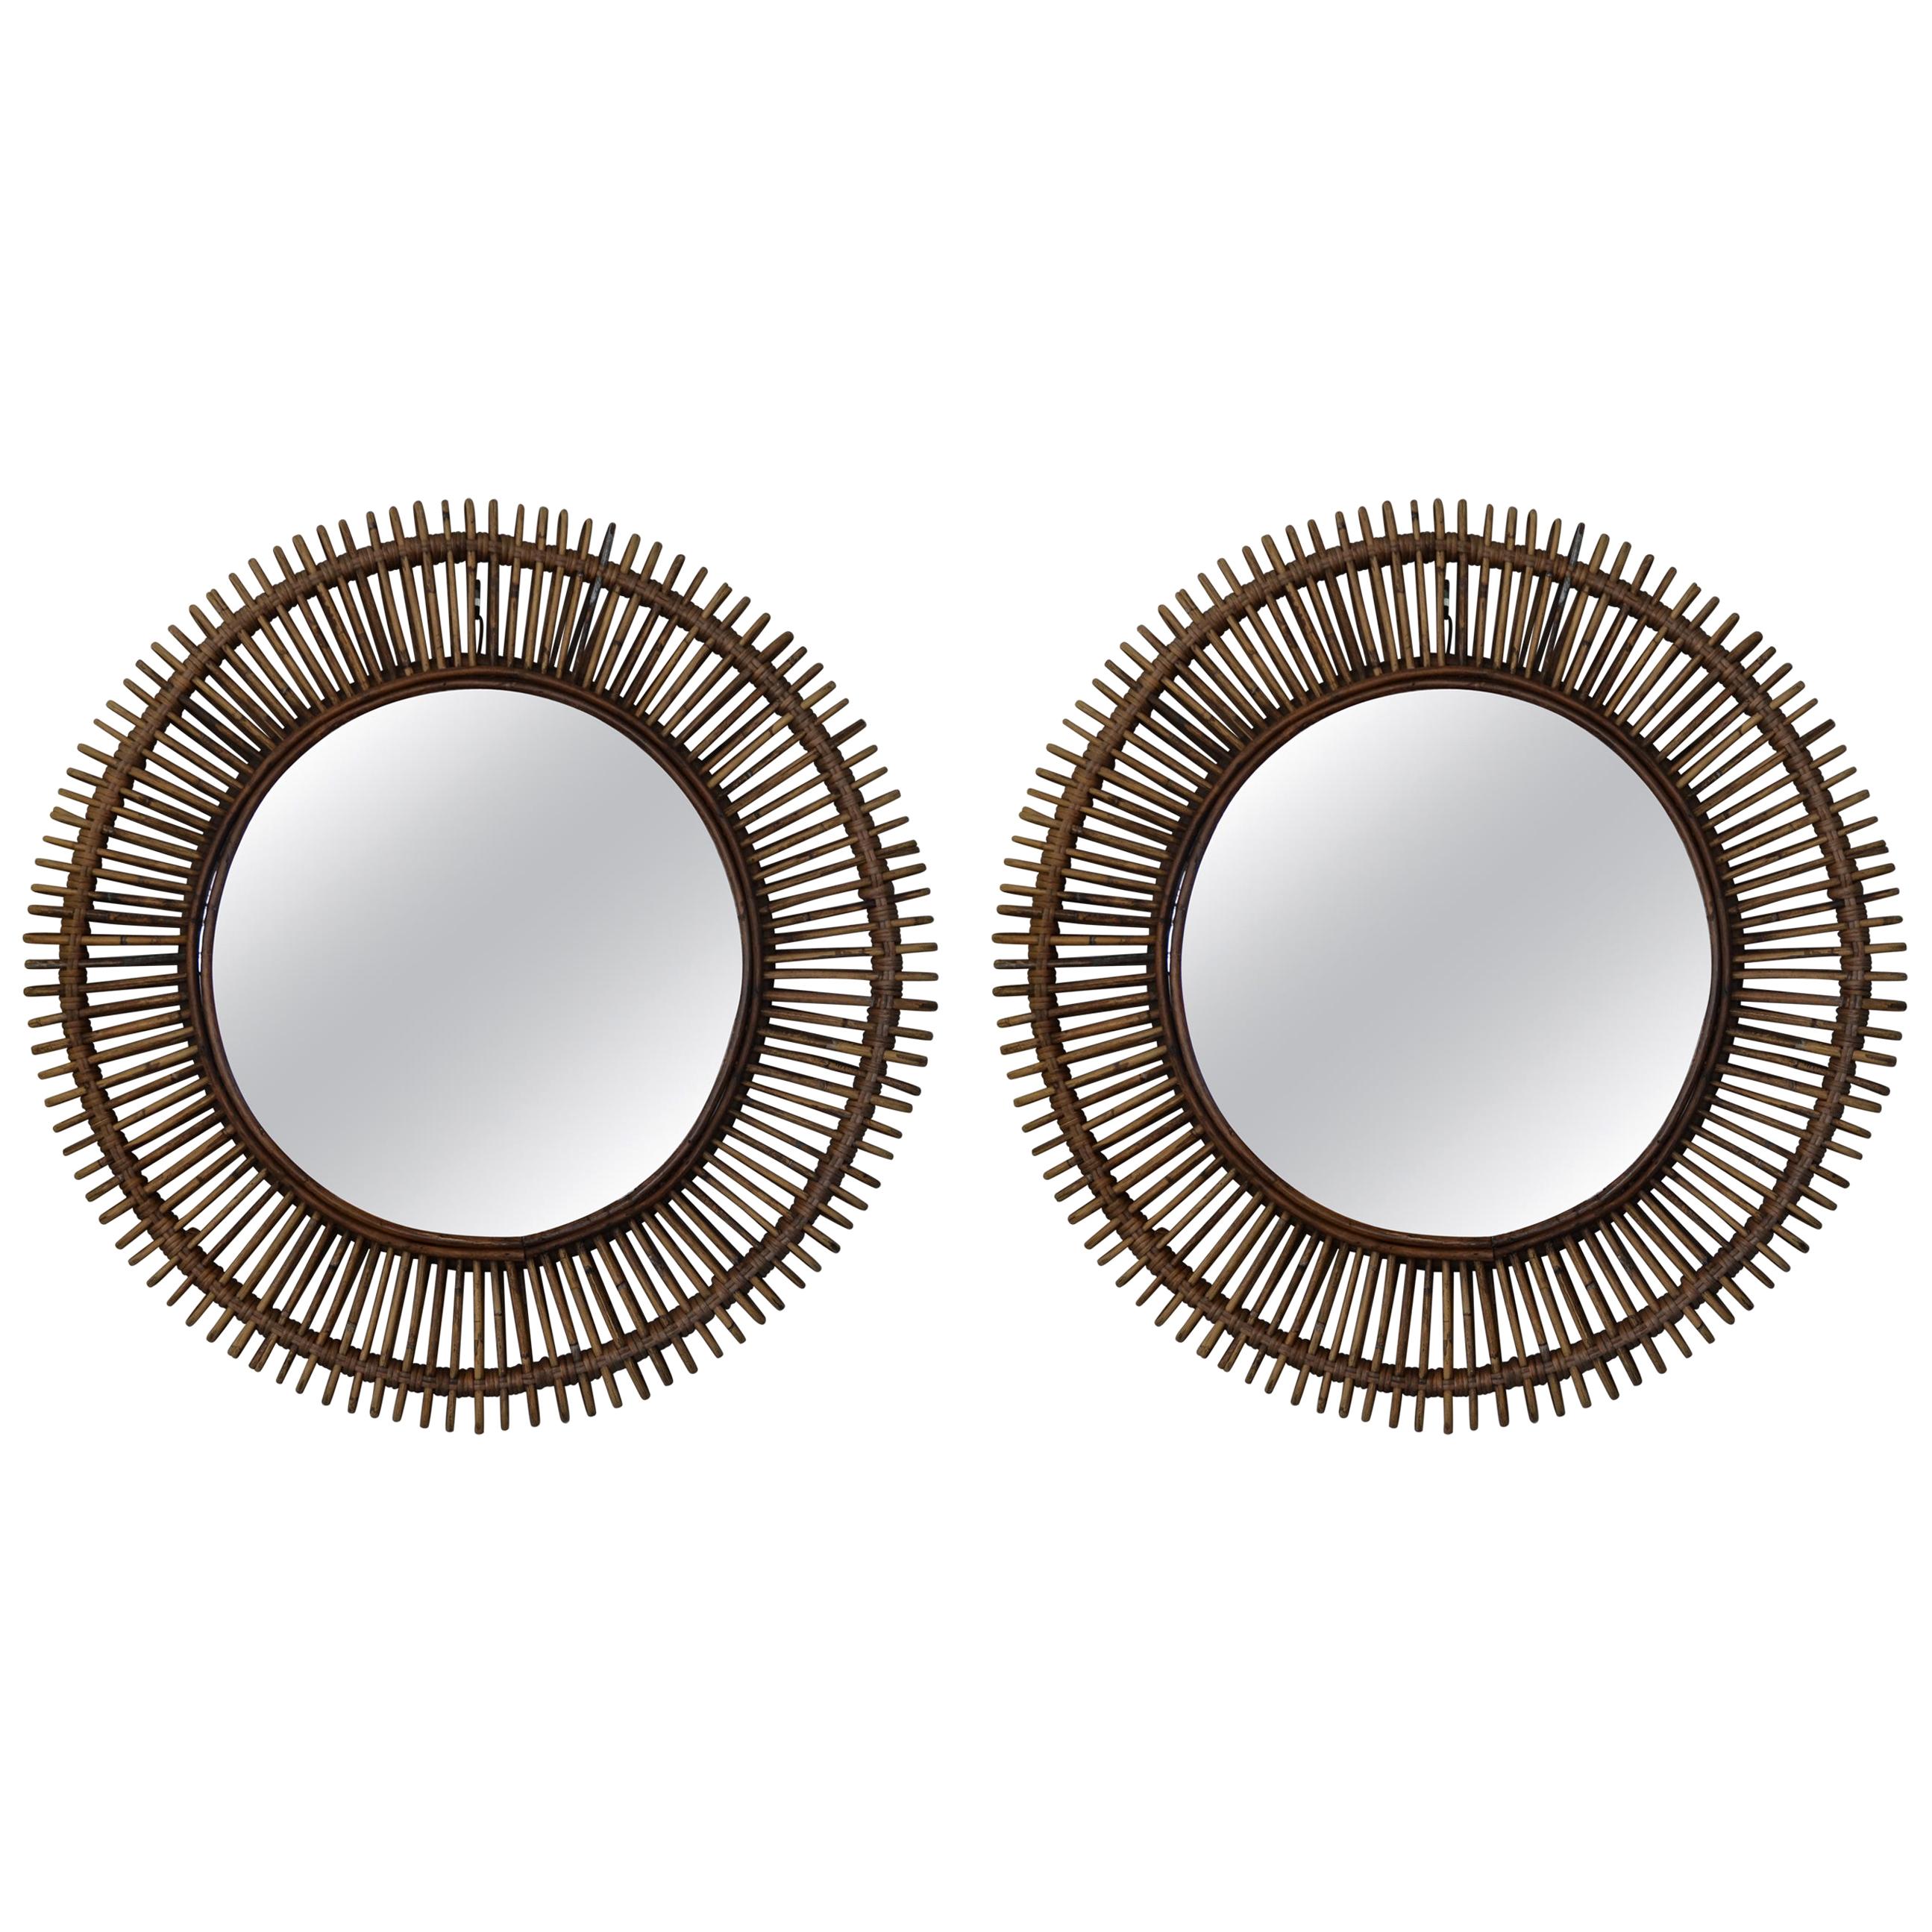 Pair of 'Oculus' Round Rattan Mirrors by Design Frères For Sale